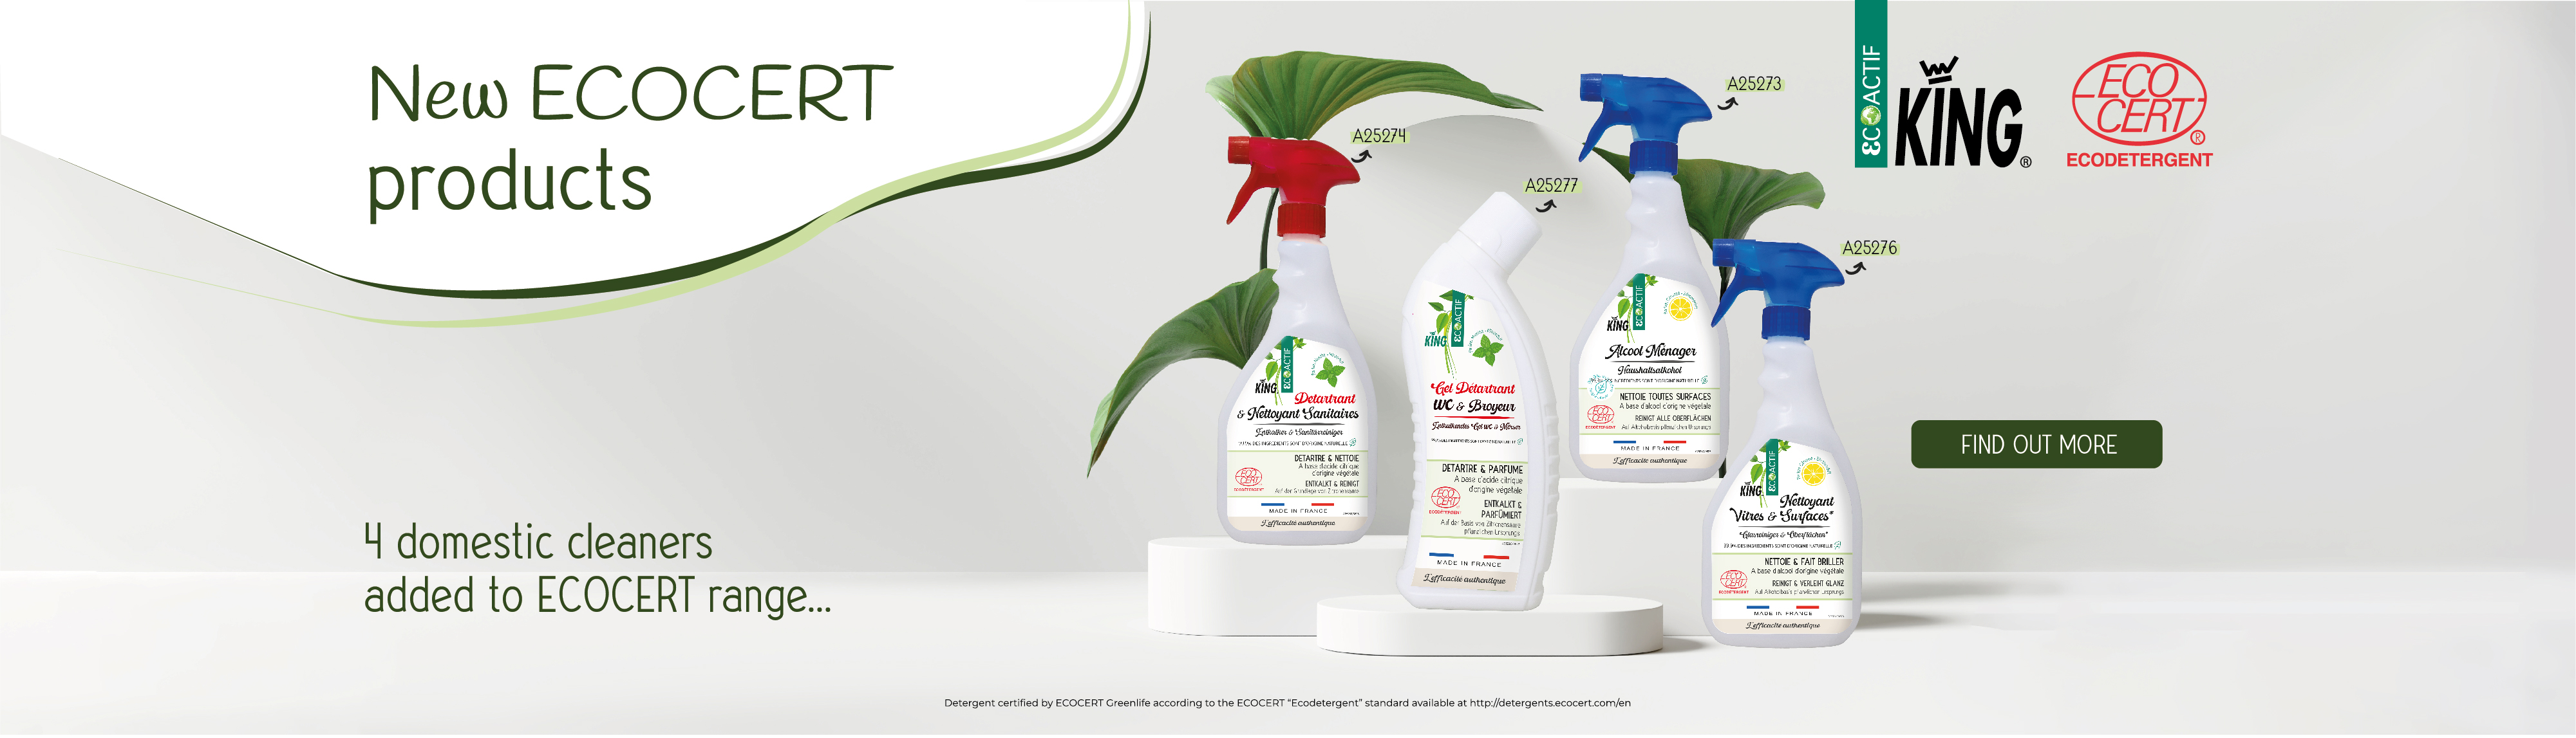 4 new ECOCERT products